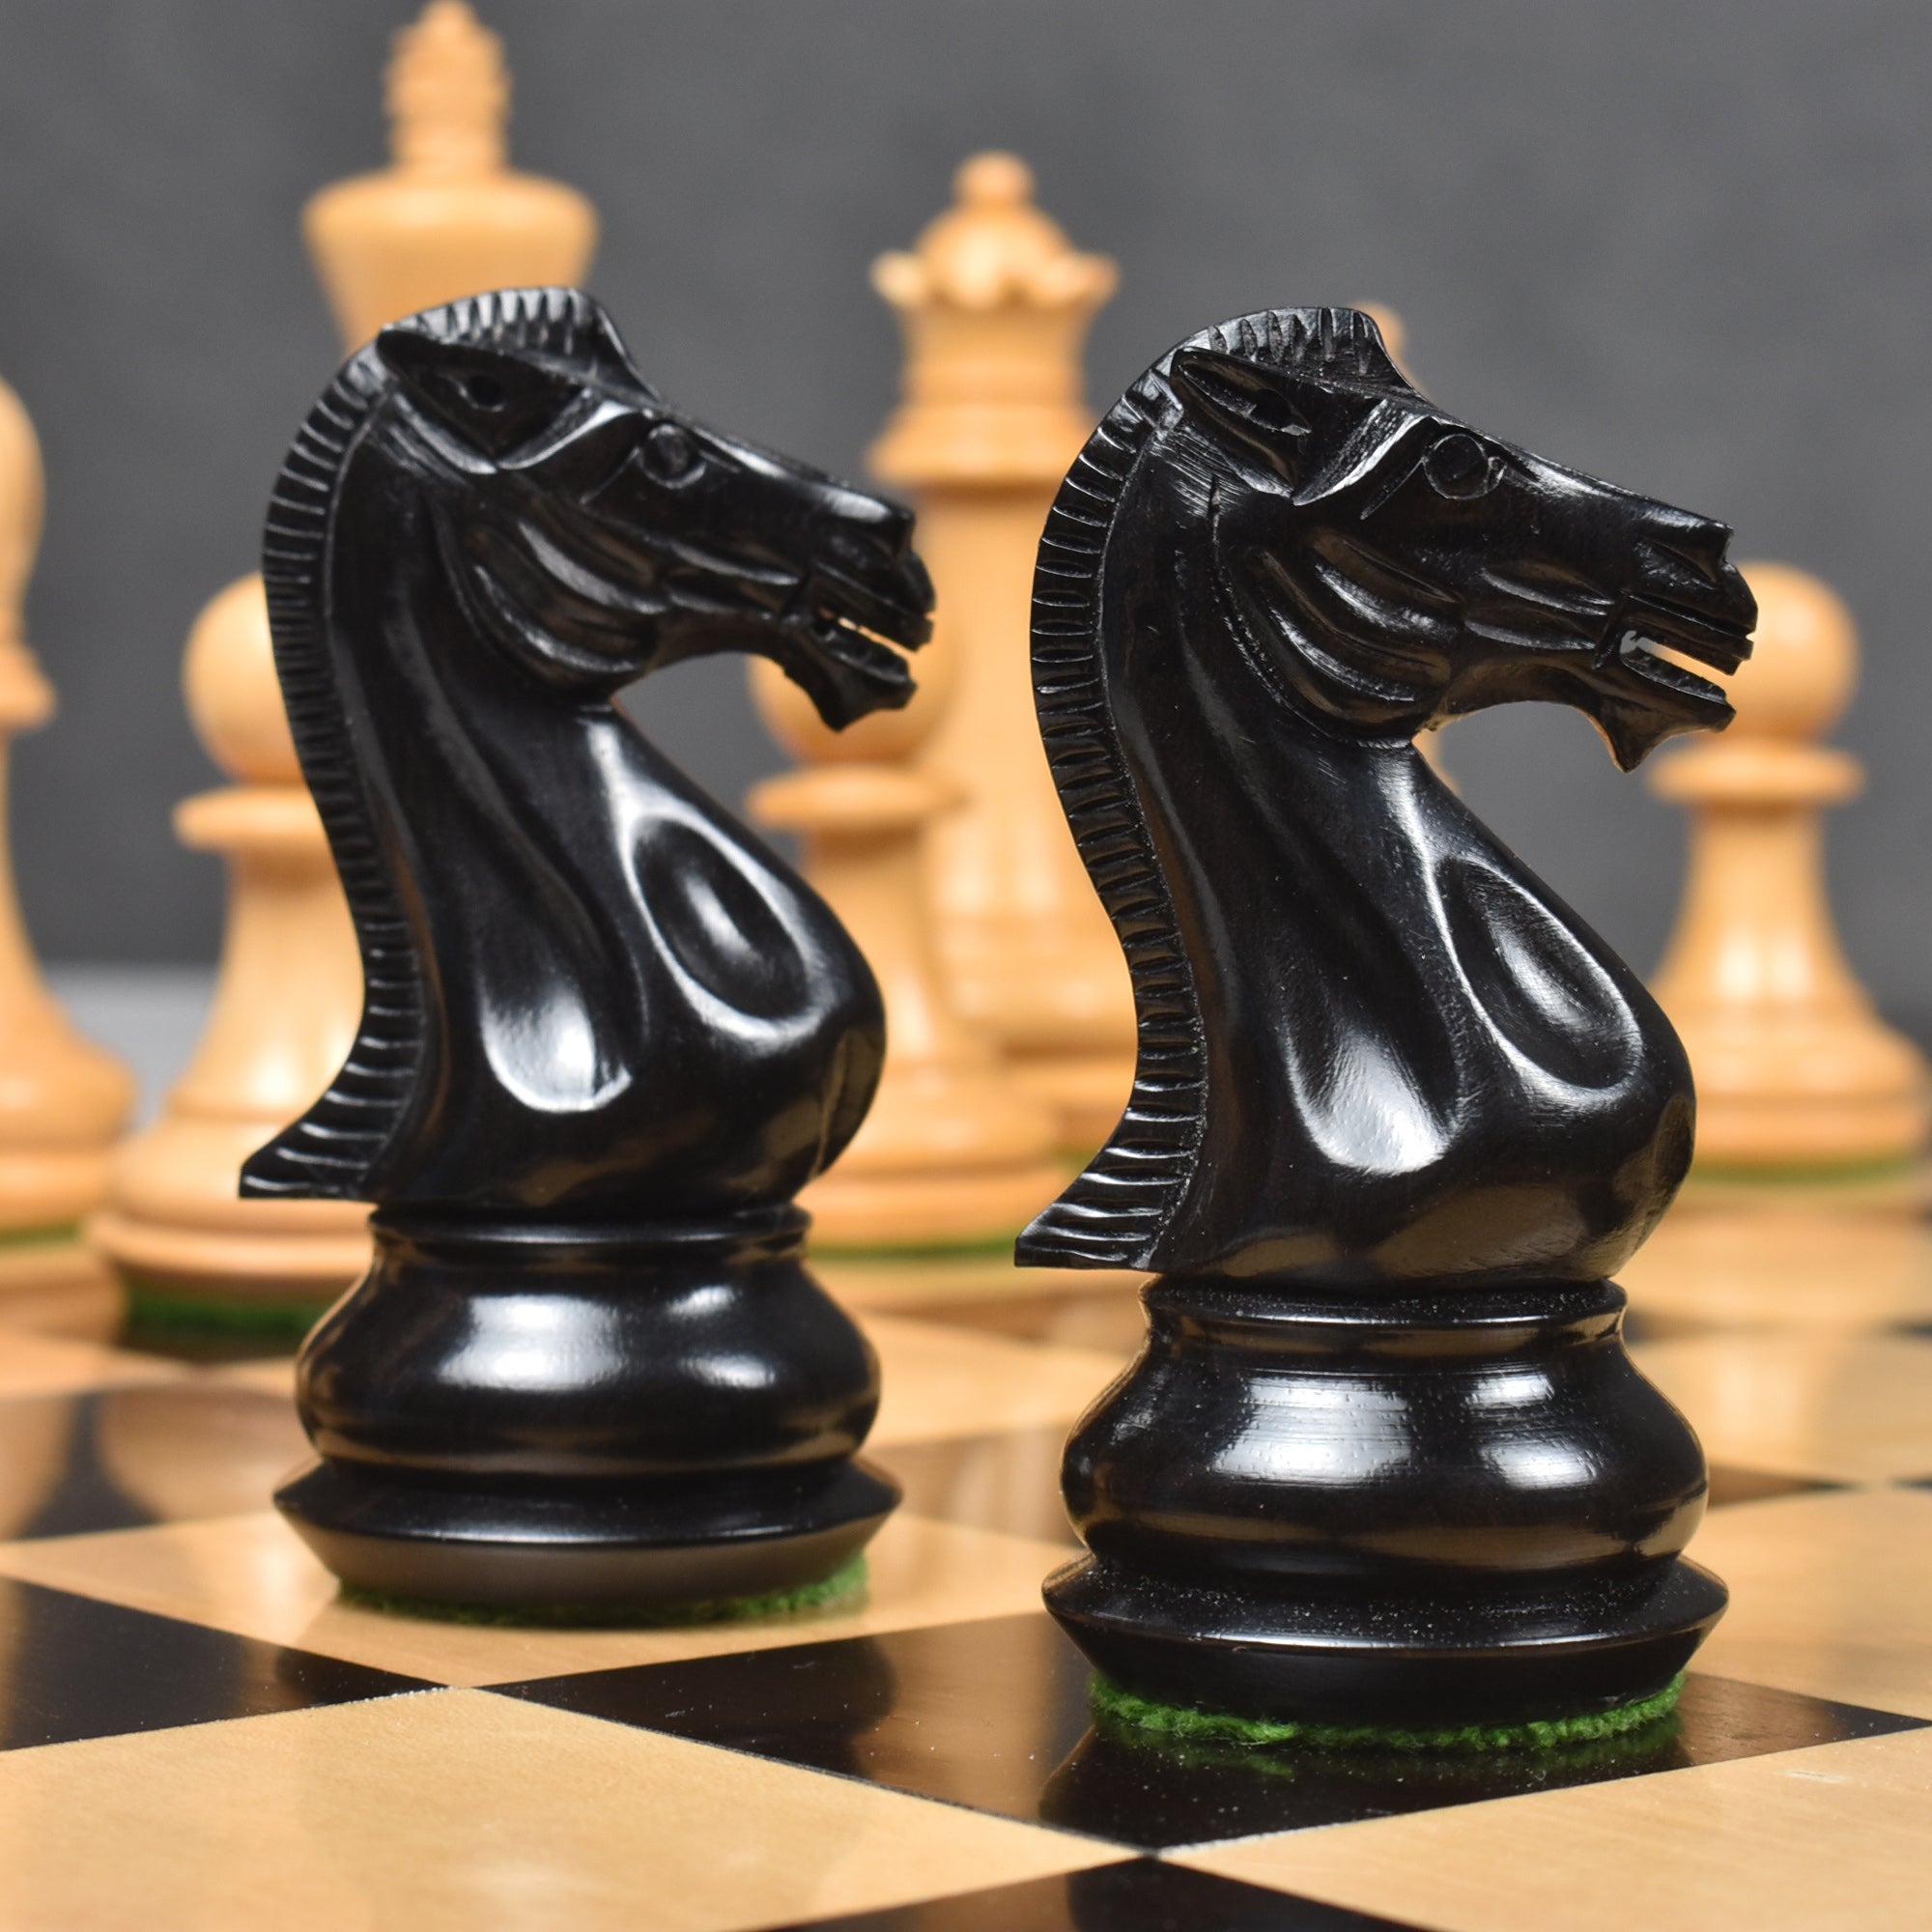 Combo of Chamfered Base Staunton Chess Set - Pieces in Ebony Wood with Board and Box